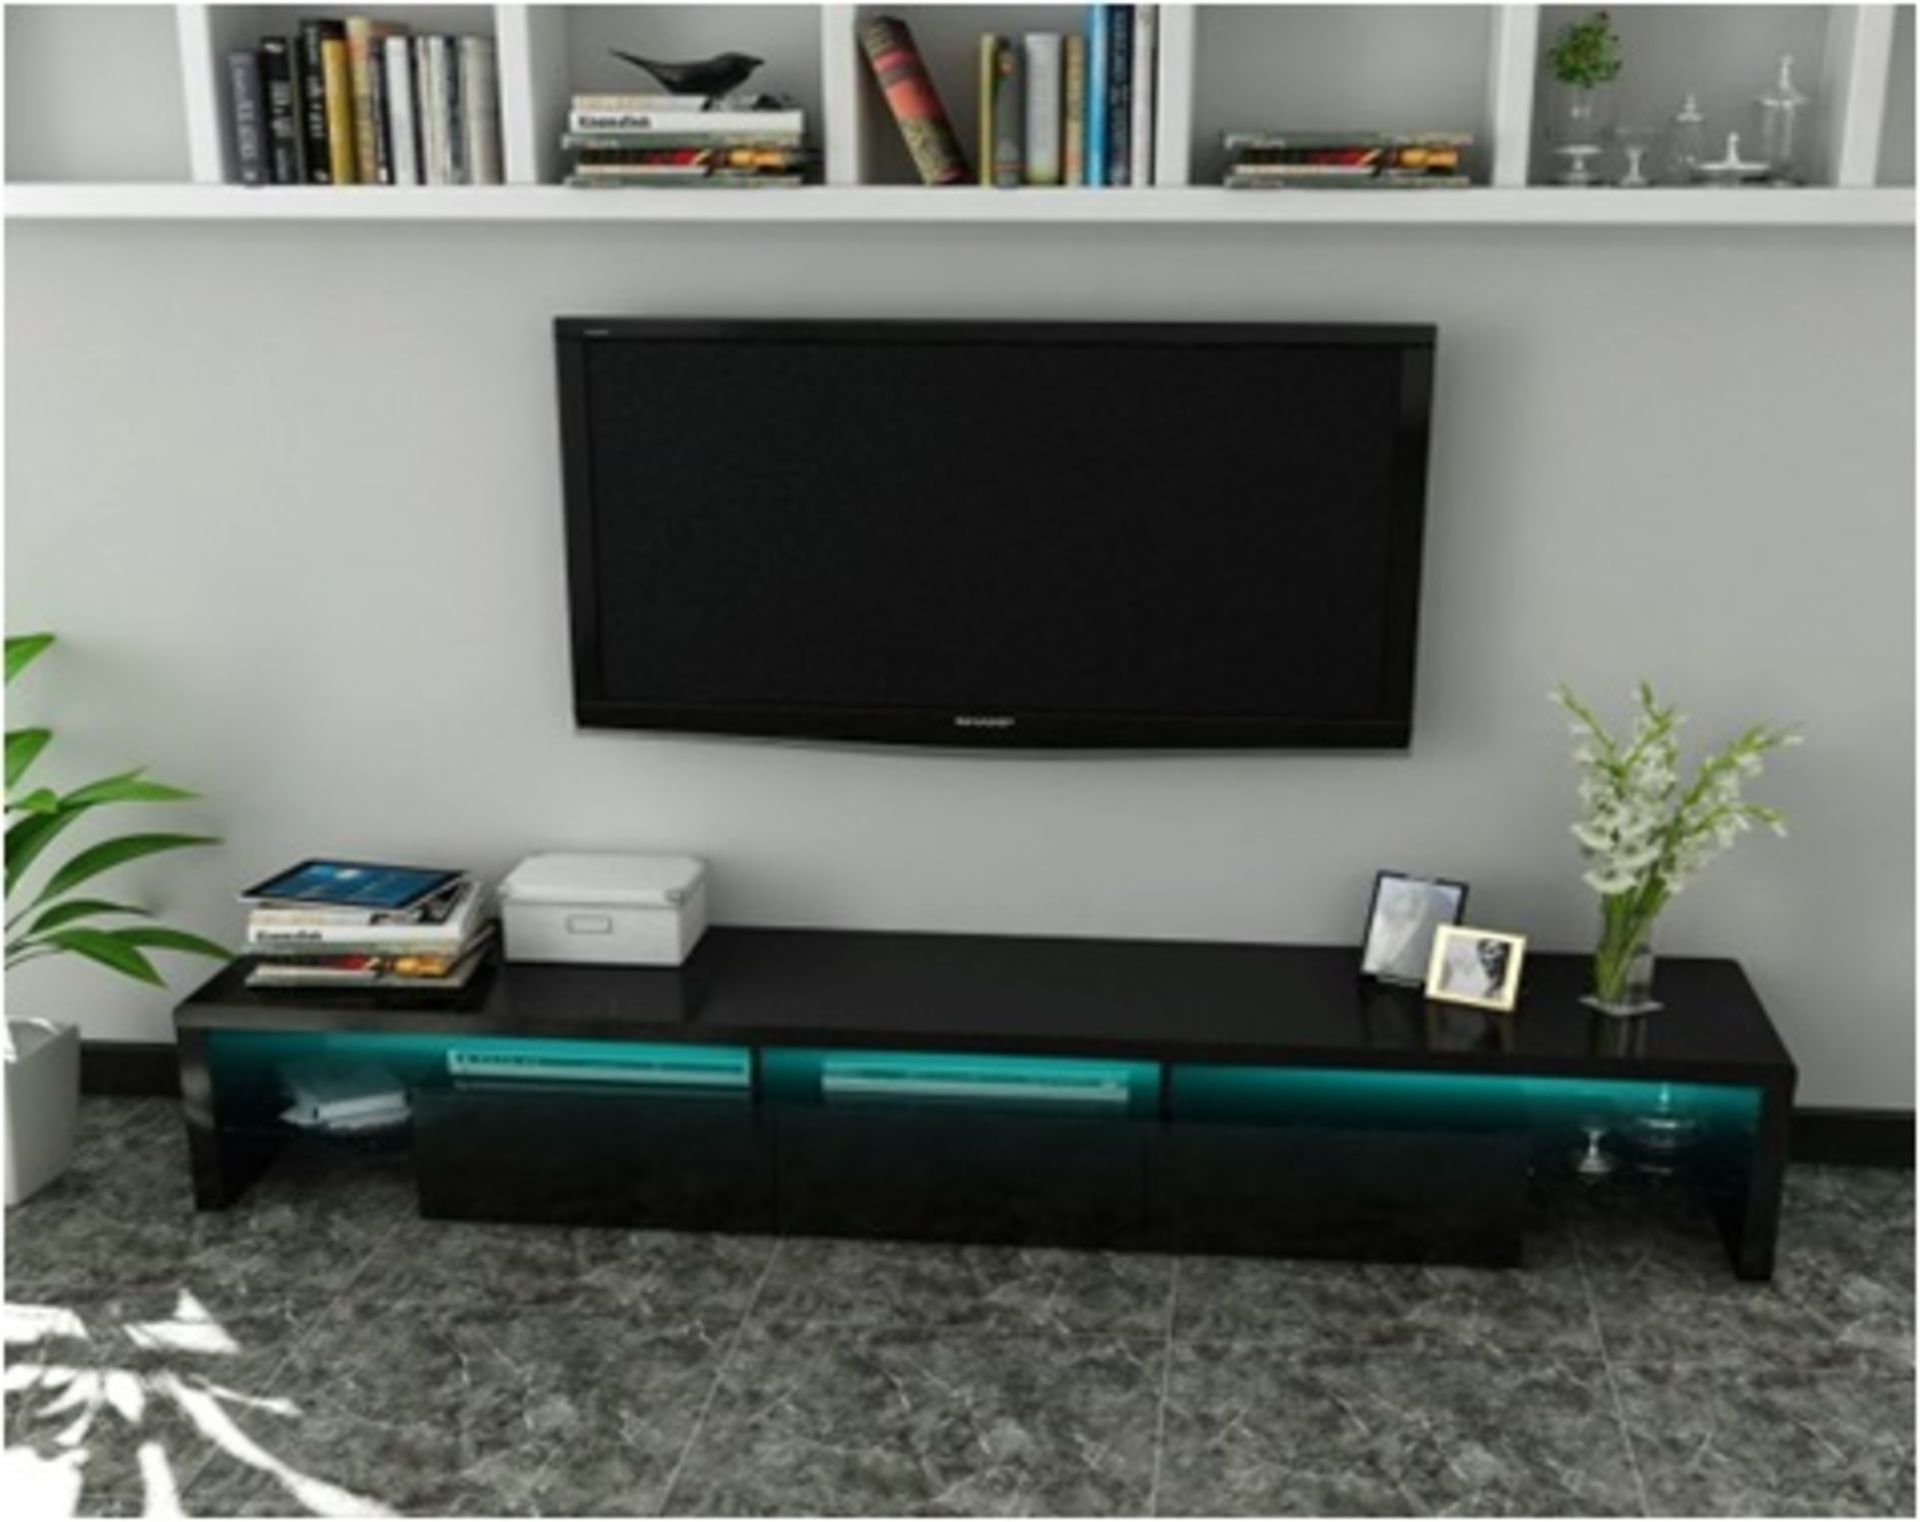 1 x Black Glossy MDF TV Stand with Colour Changing LED Lights (Brand New & Boxed)